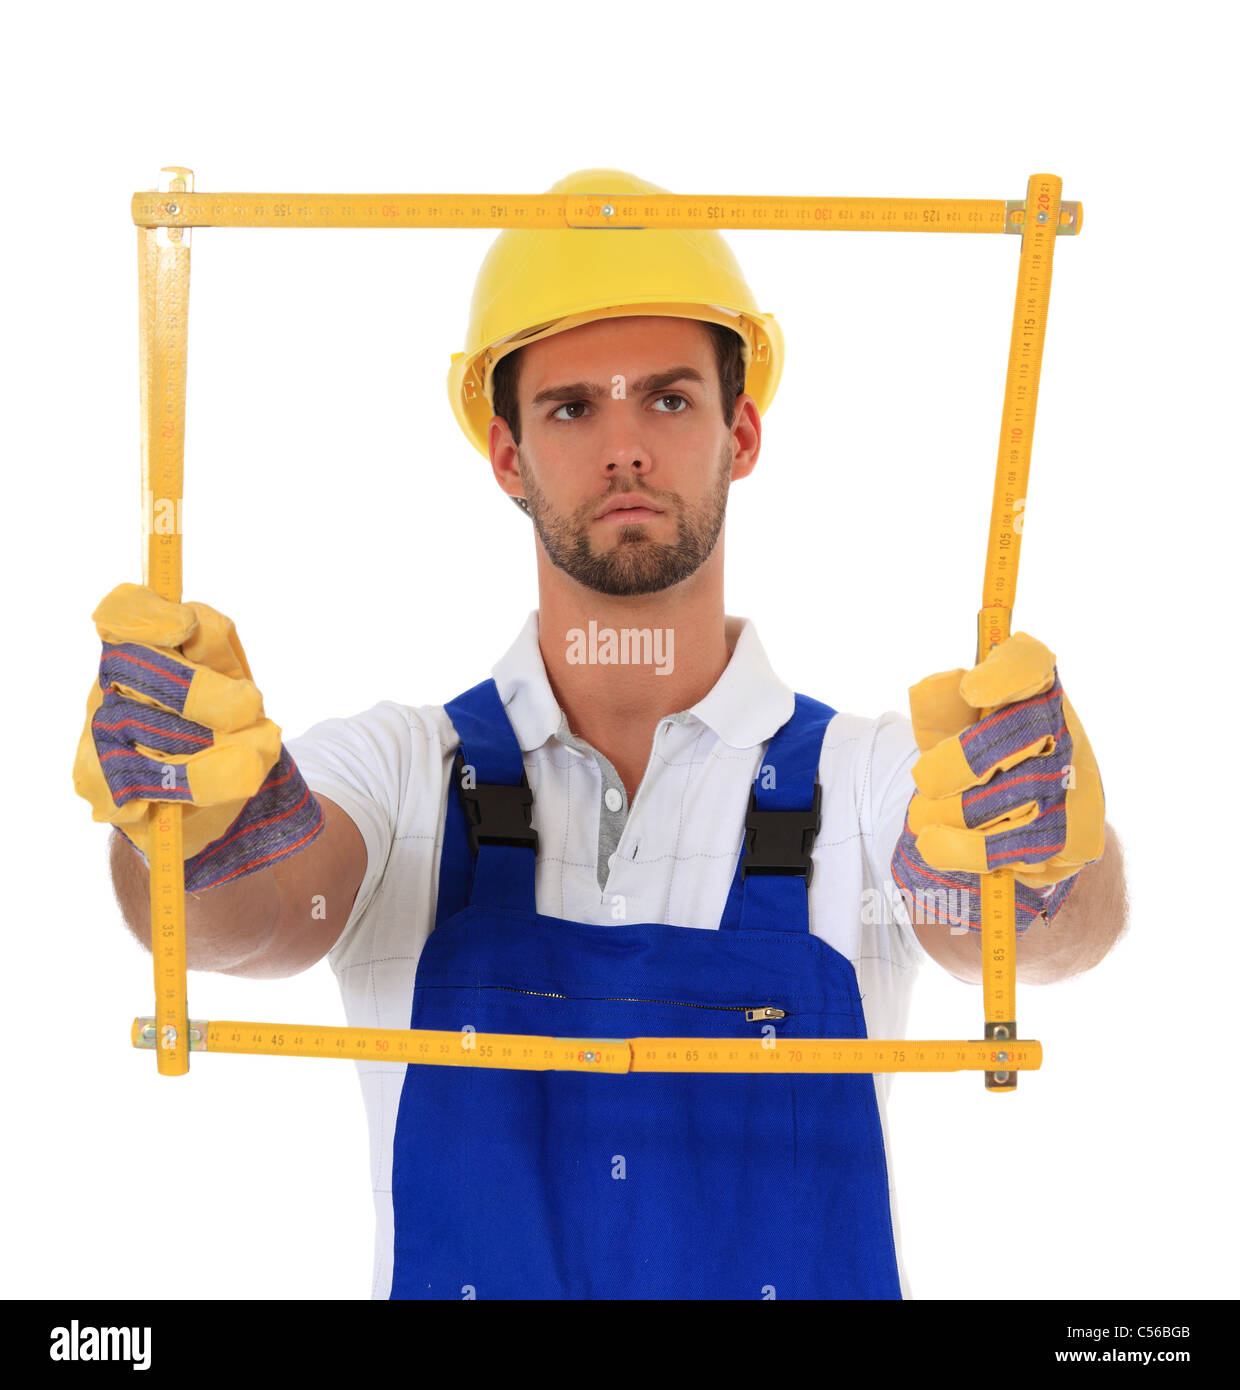 Manual worker holding yardstick. All on white background. Stock Photo